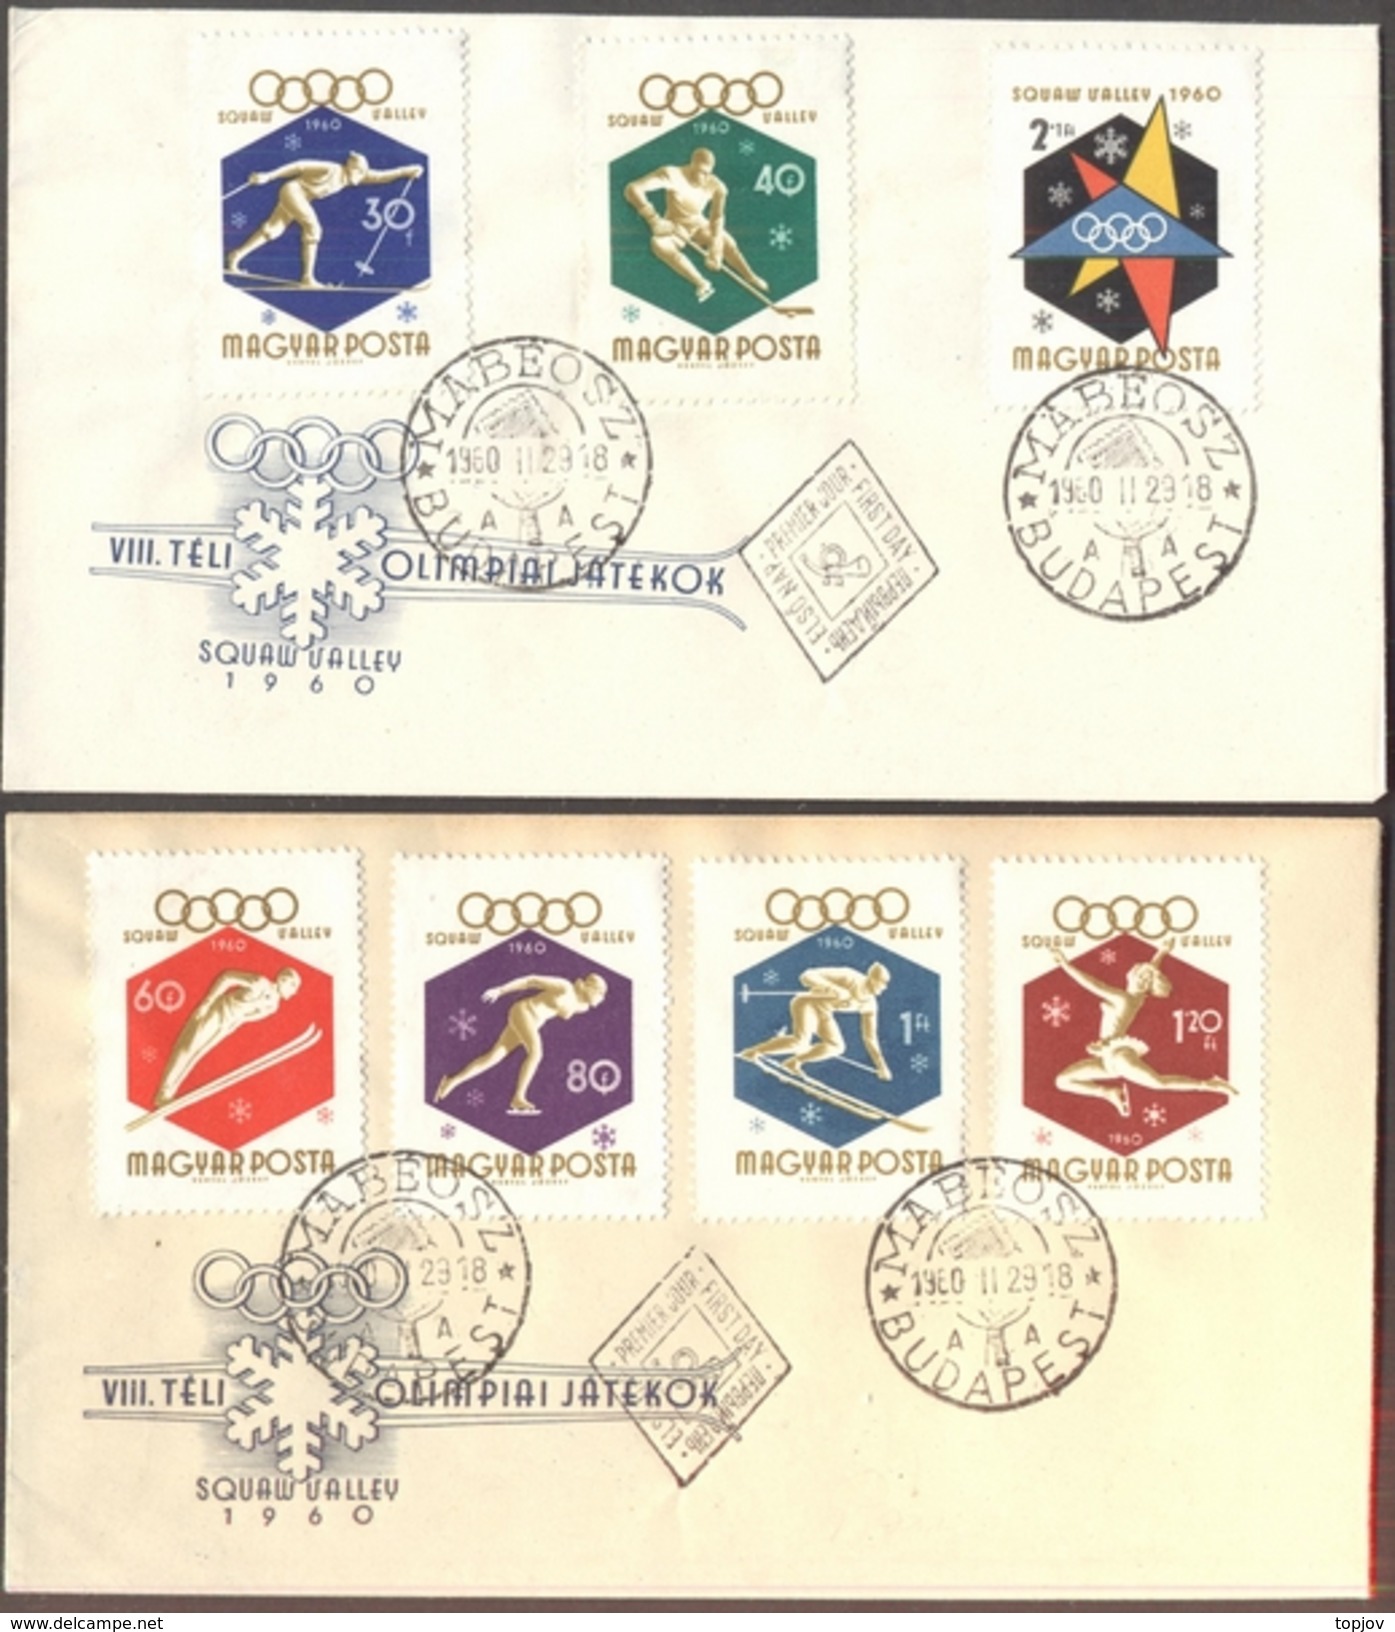 HUNGARY - MAGYARORS. - OLYMPICS  SQUAW  VALLEY - 1960 - Hiver 1960: Squaw Valley